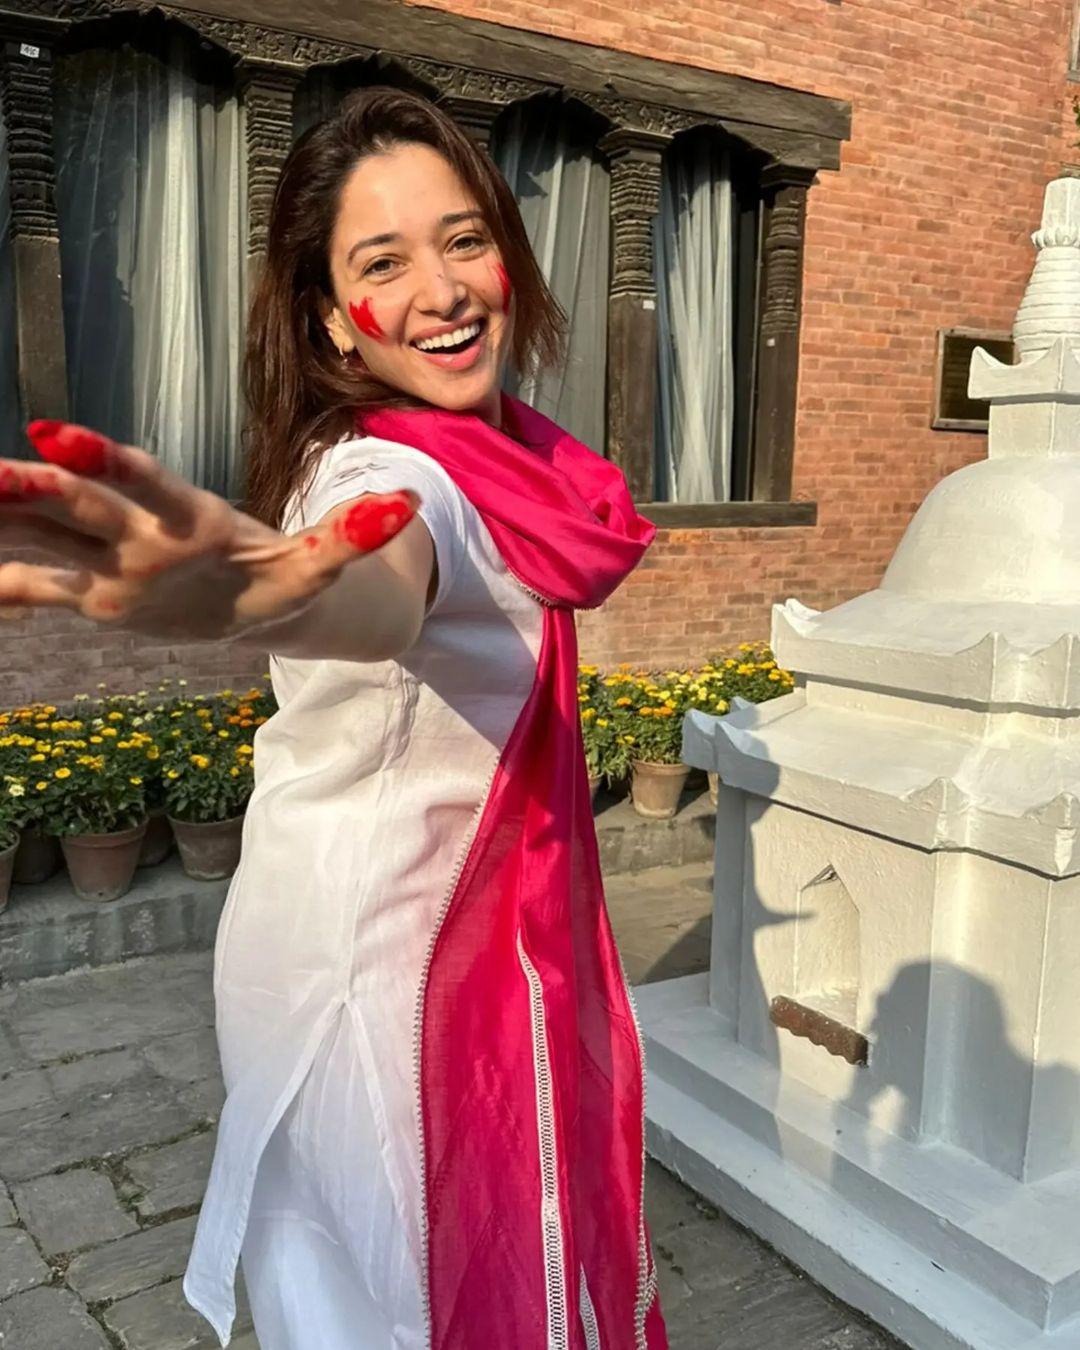 Tamannaah celebrated the day in Nepal and took to her Instagram handle to share happy pictures of herself with gulaal on her cheek